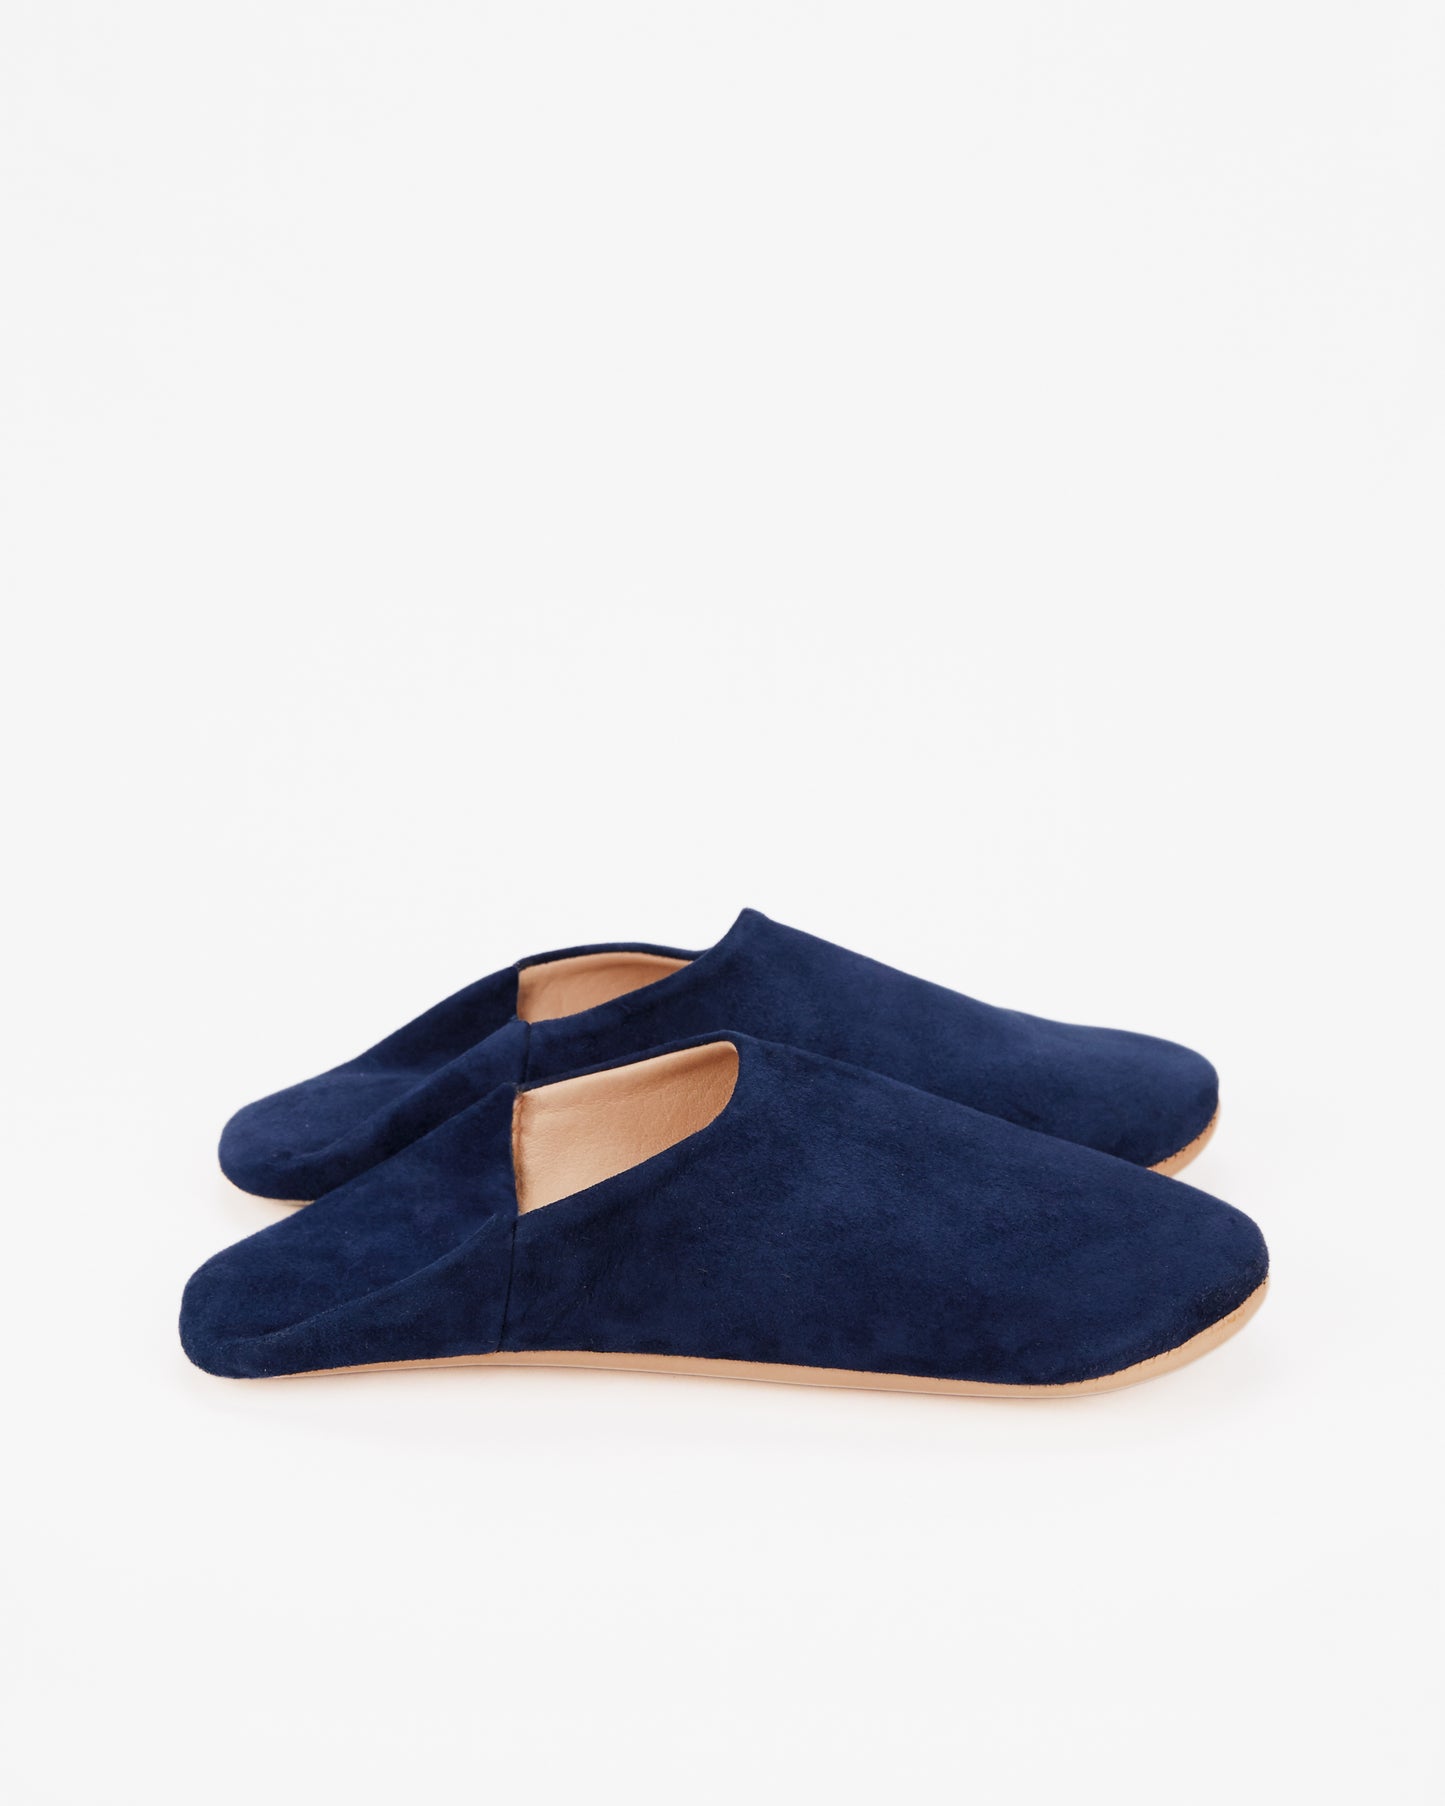 Moroccan Slippers, Navy